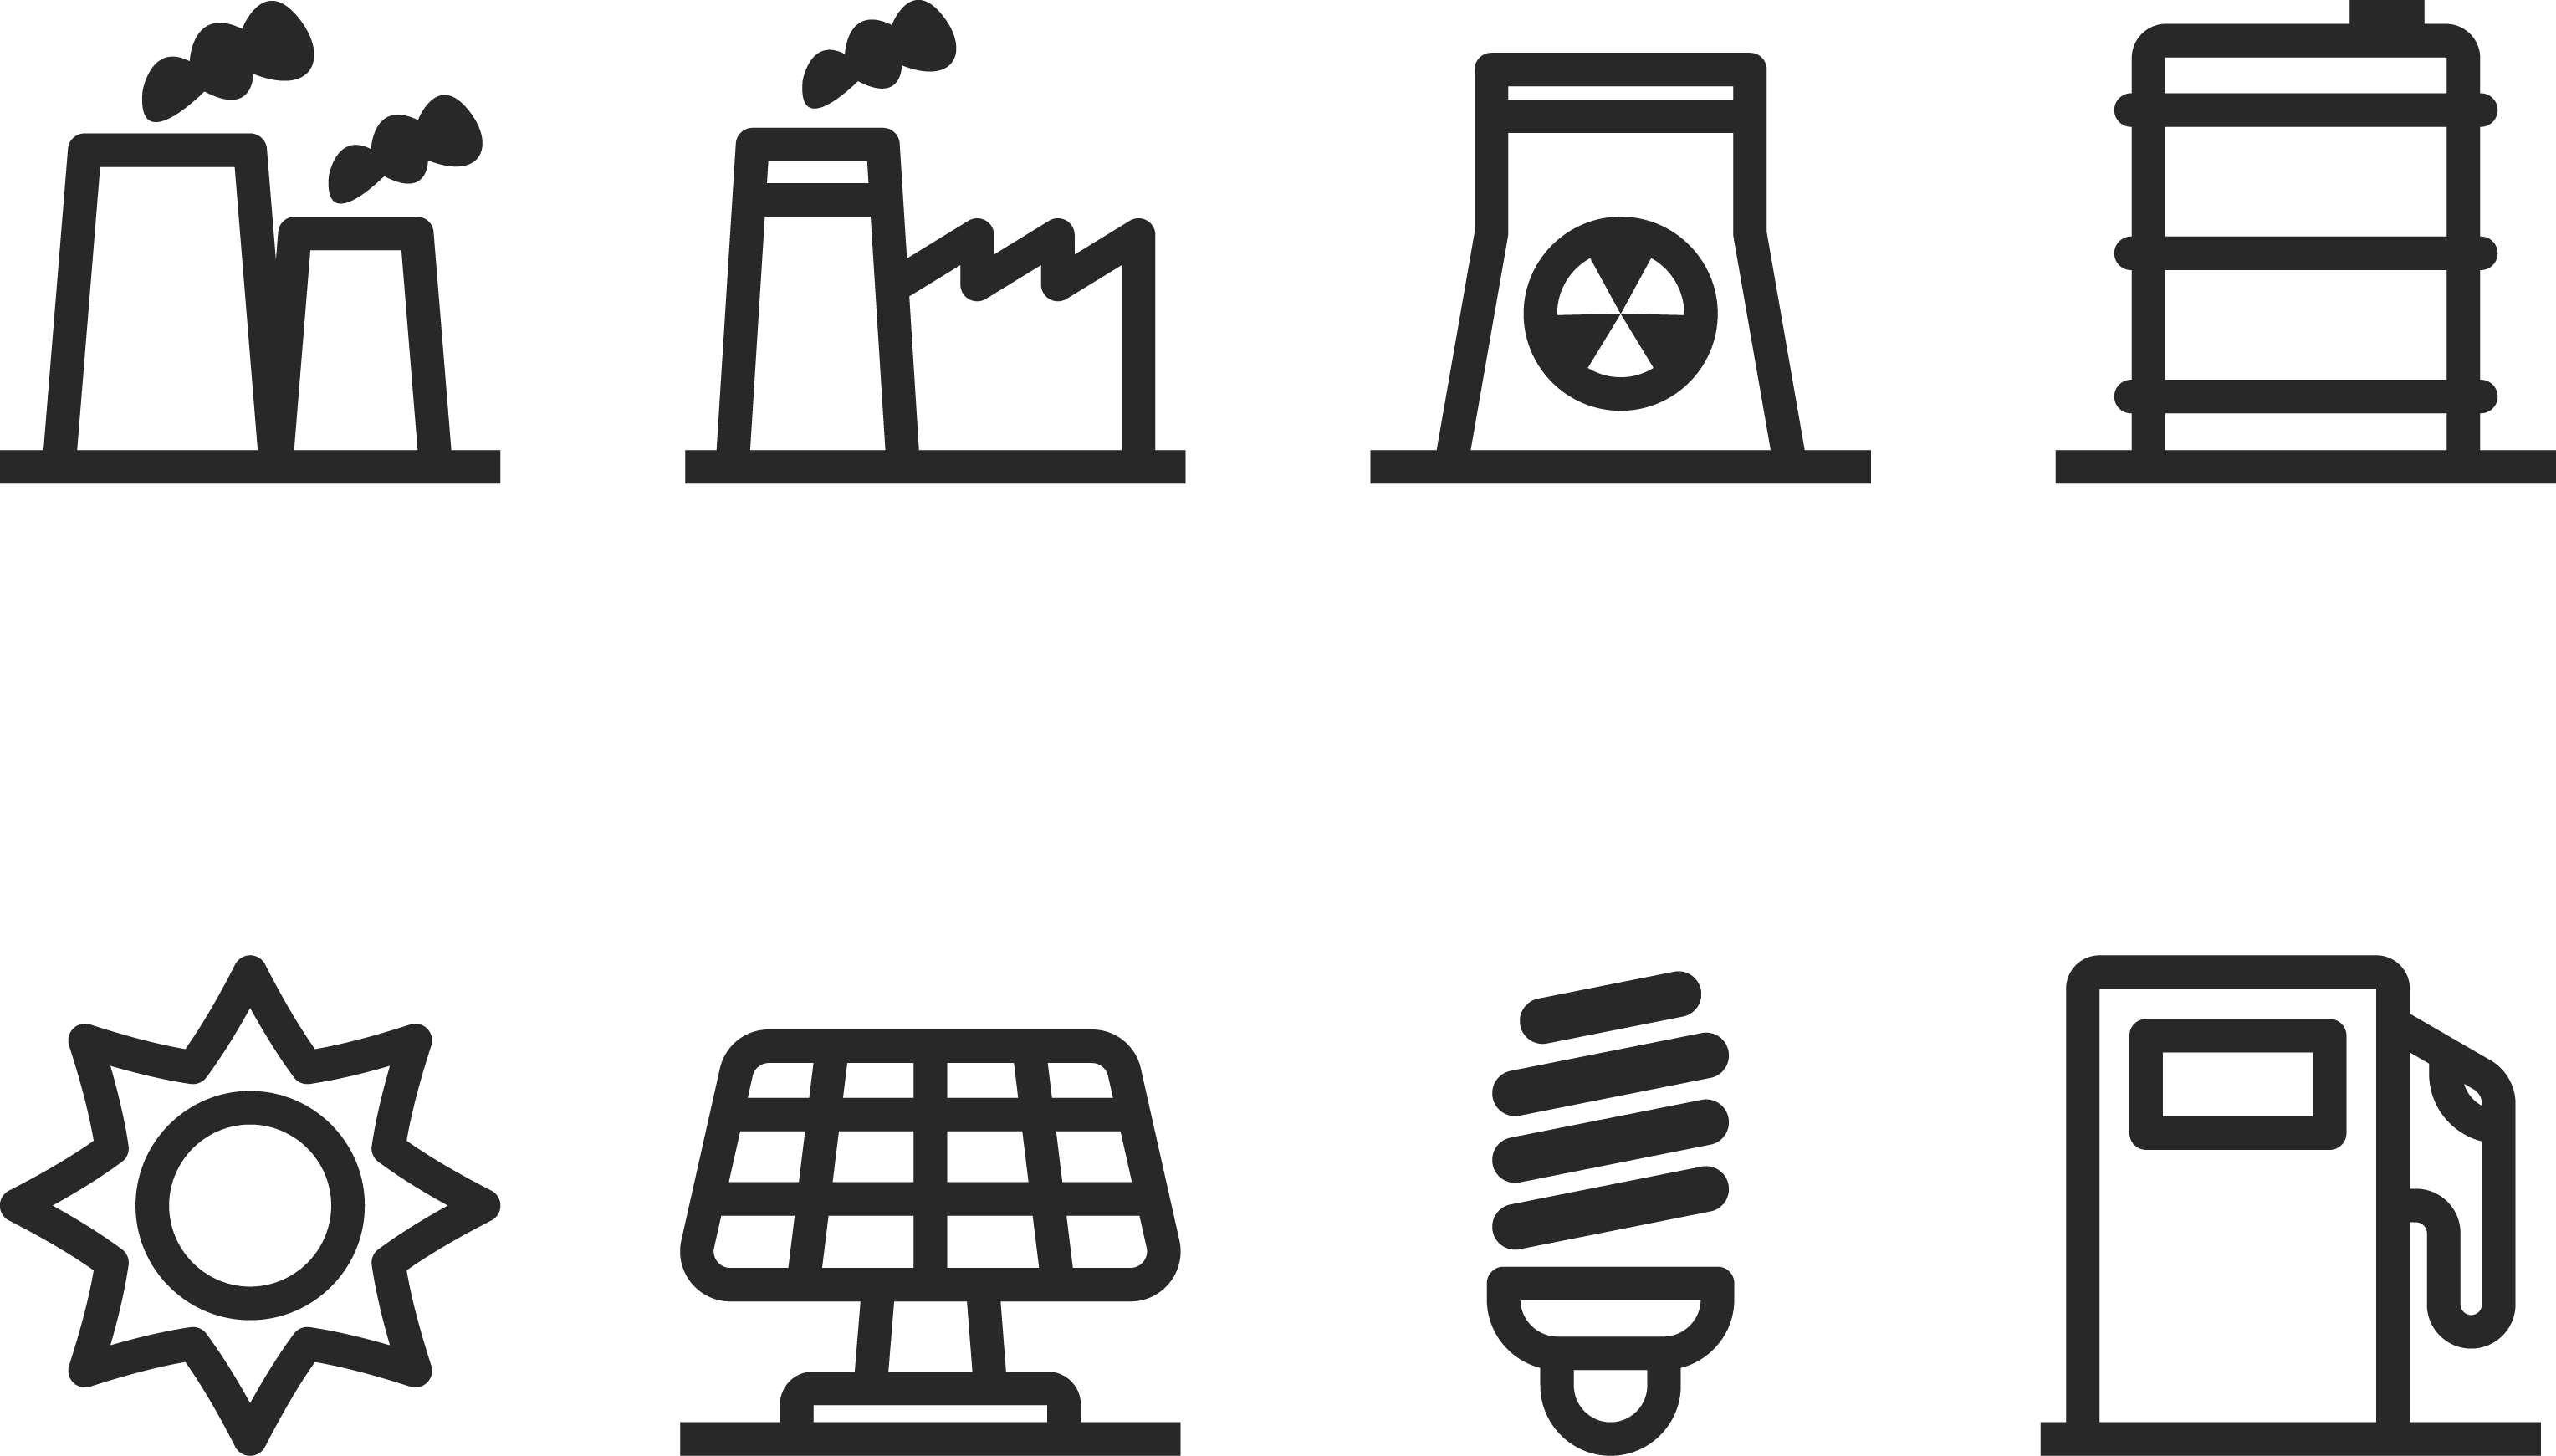 3056 X 1741 4 - Icon Set For Industries (3056x1741)